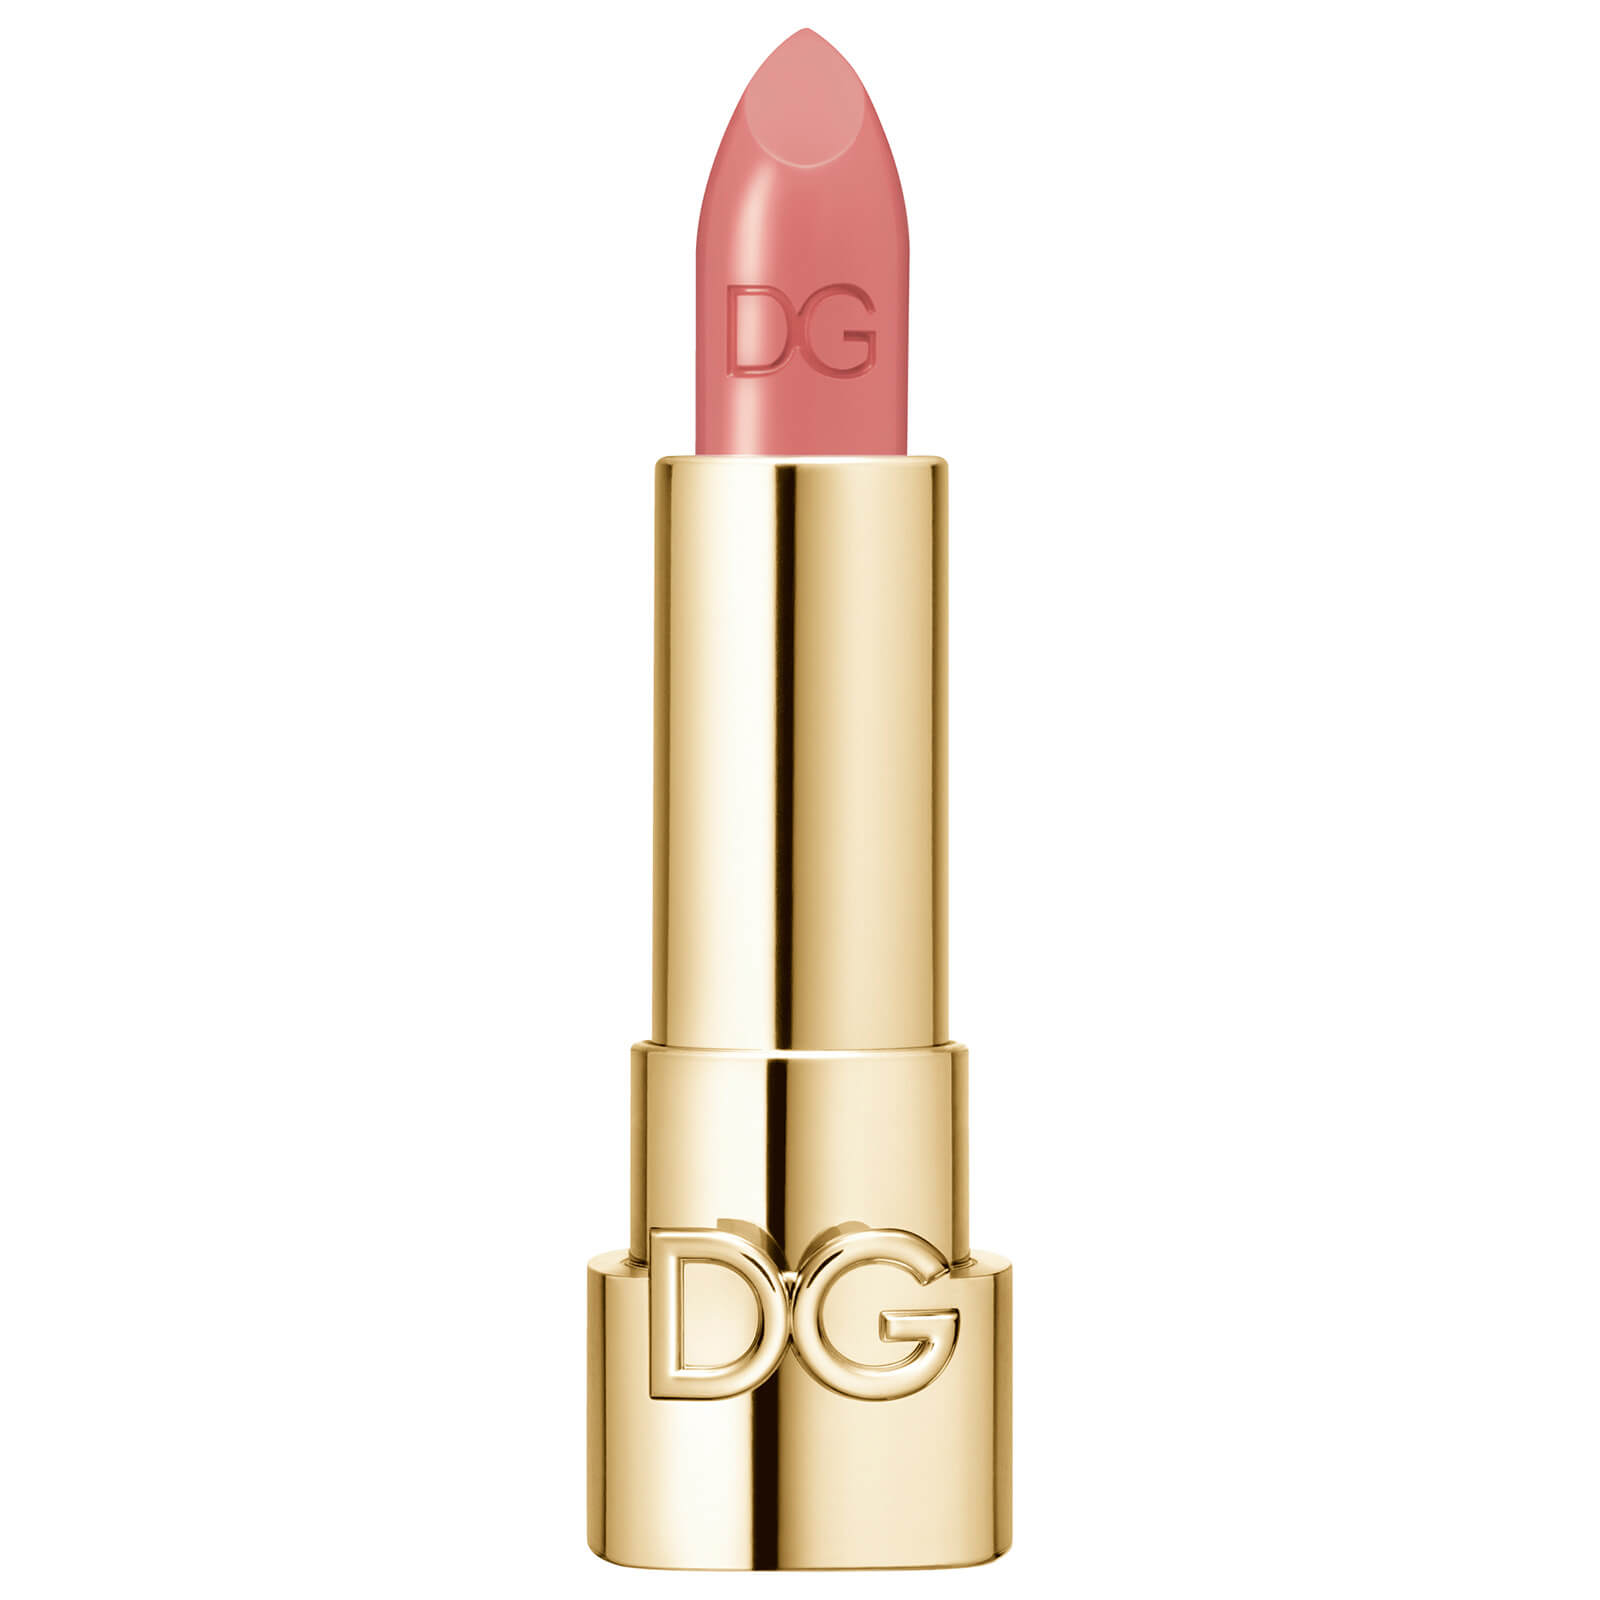 dolce&gabbana the only one lipstick 1.7g (no cap) (various shades) - 120 hot sand